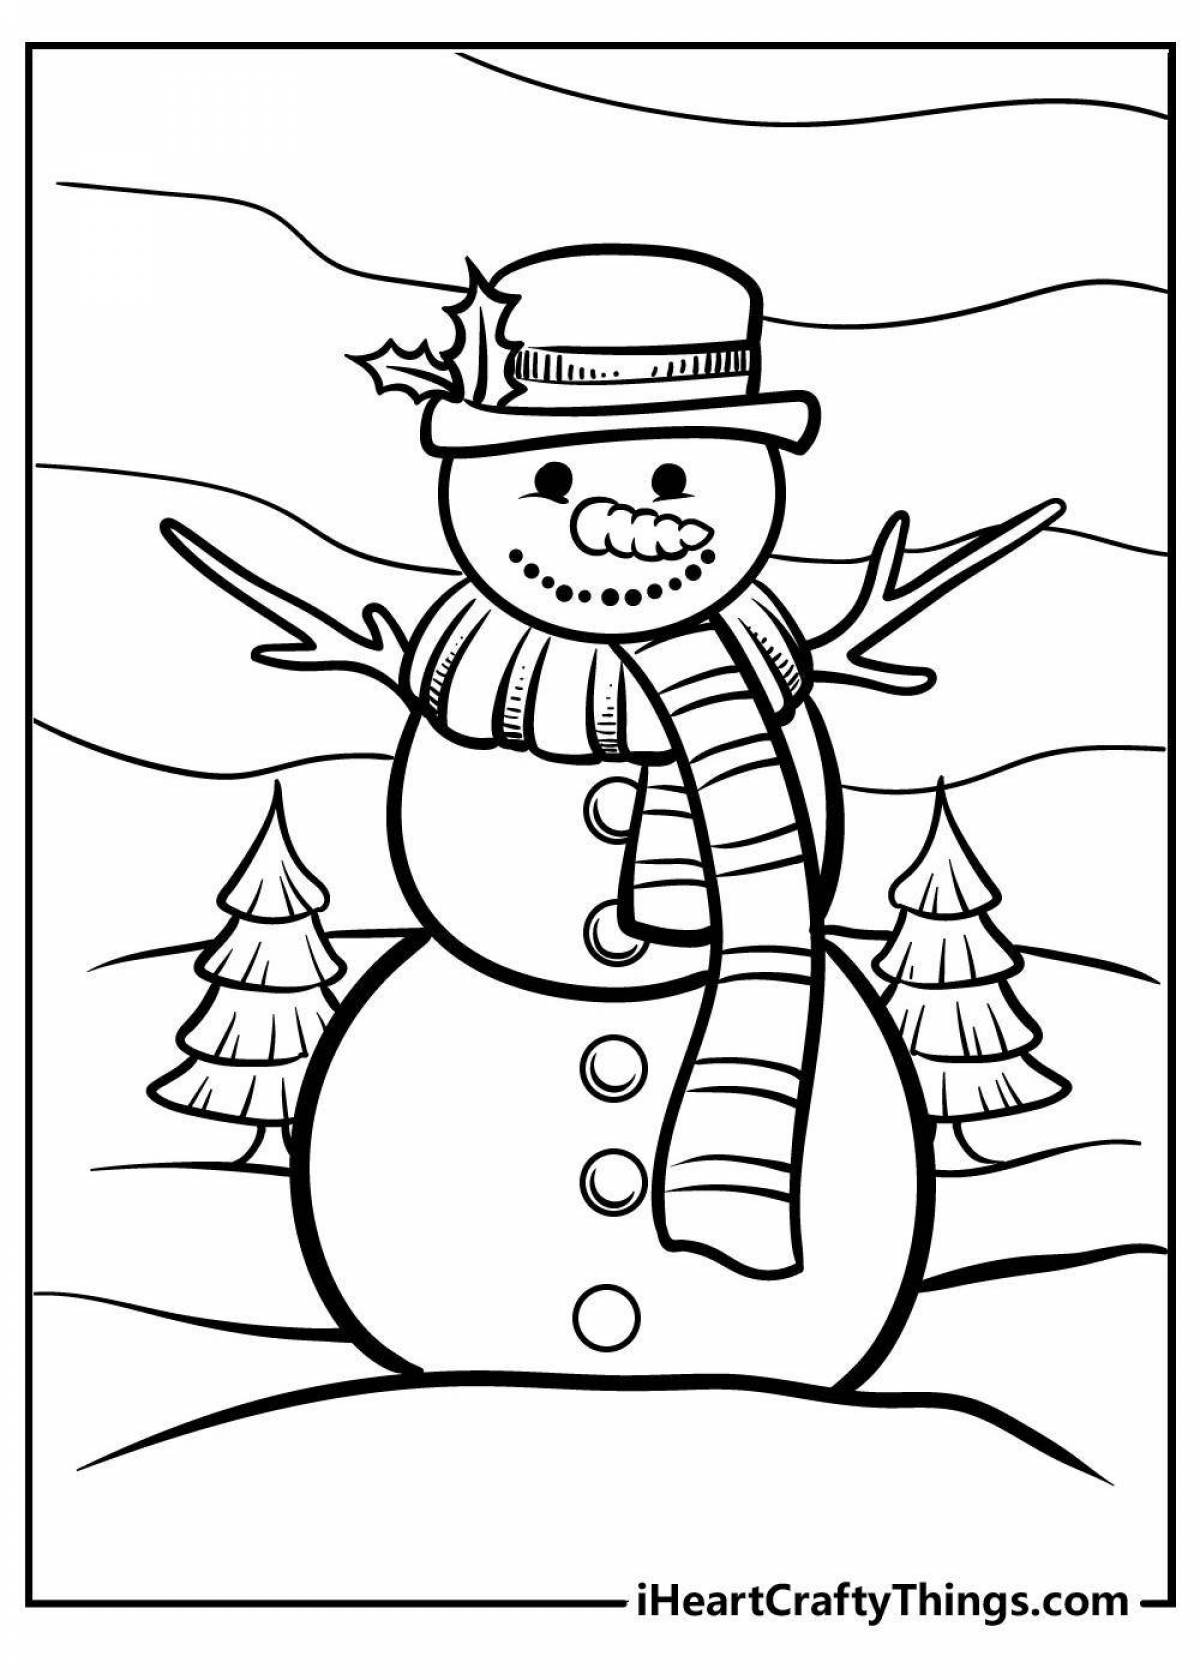 Holiday coloring book snowman in a hot air balloon